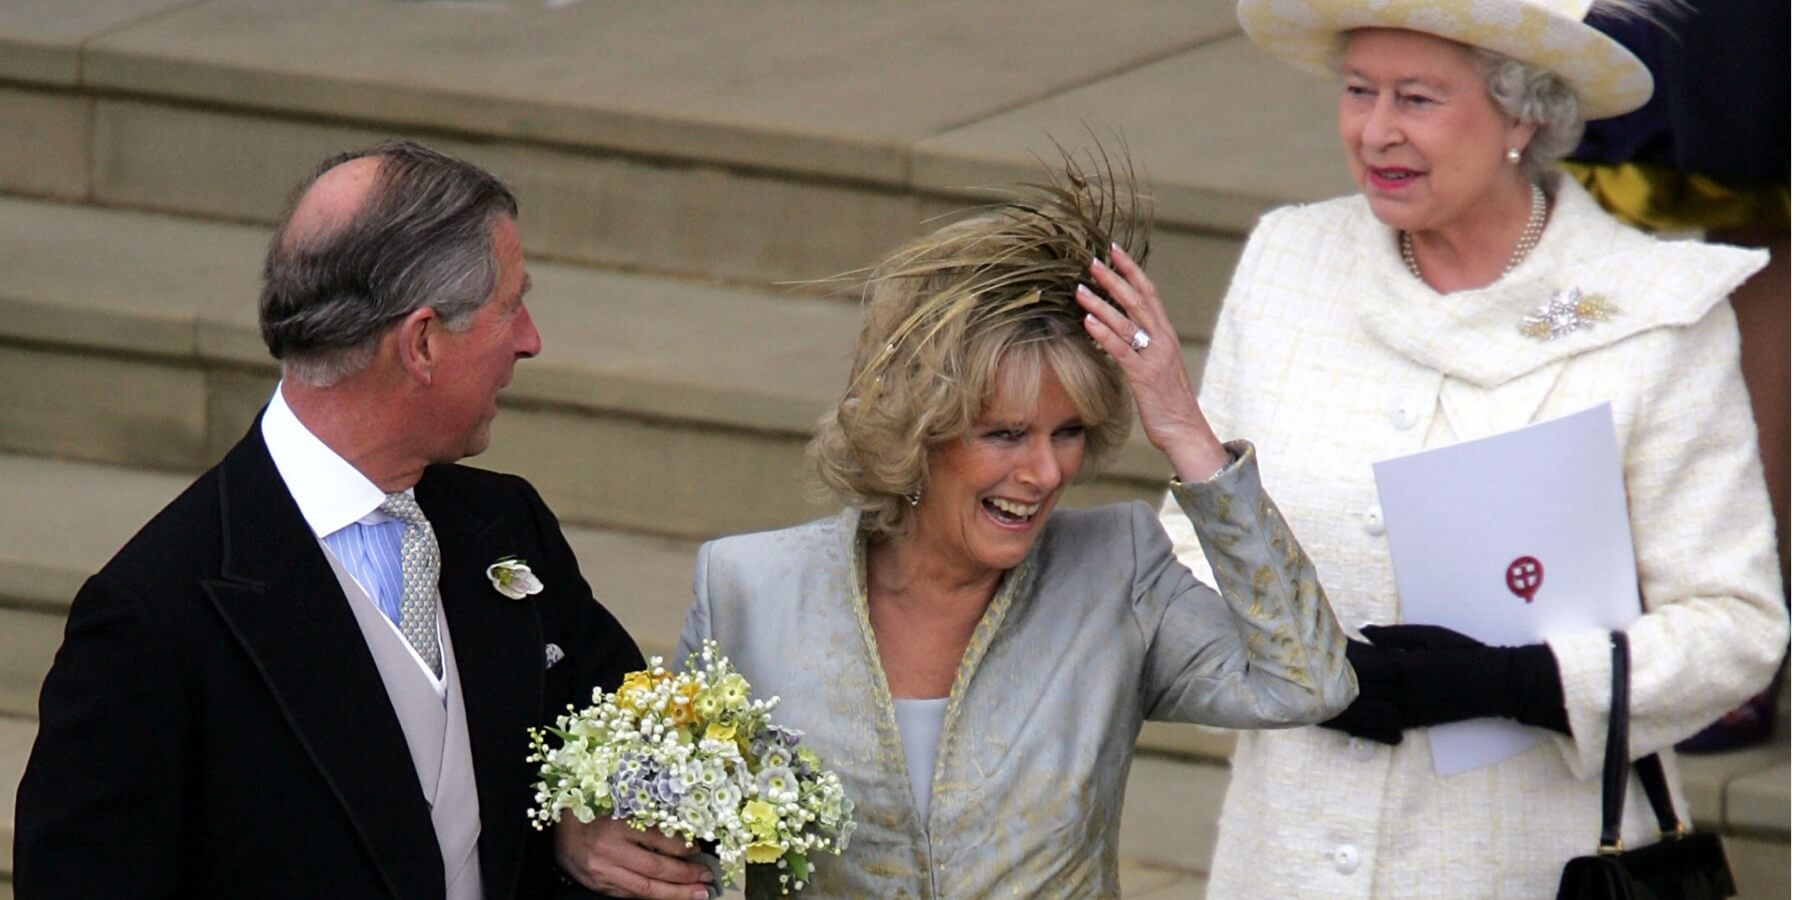 King Charles, Camilla Parker Bowles and Queen Elizabeth in 2005.